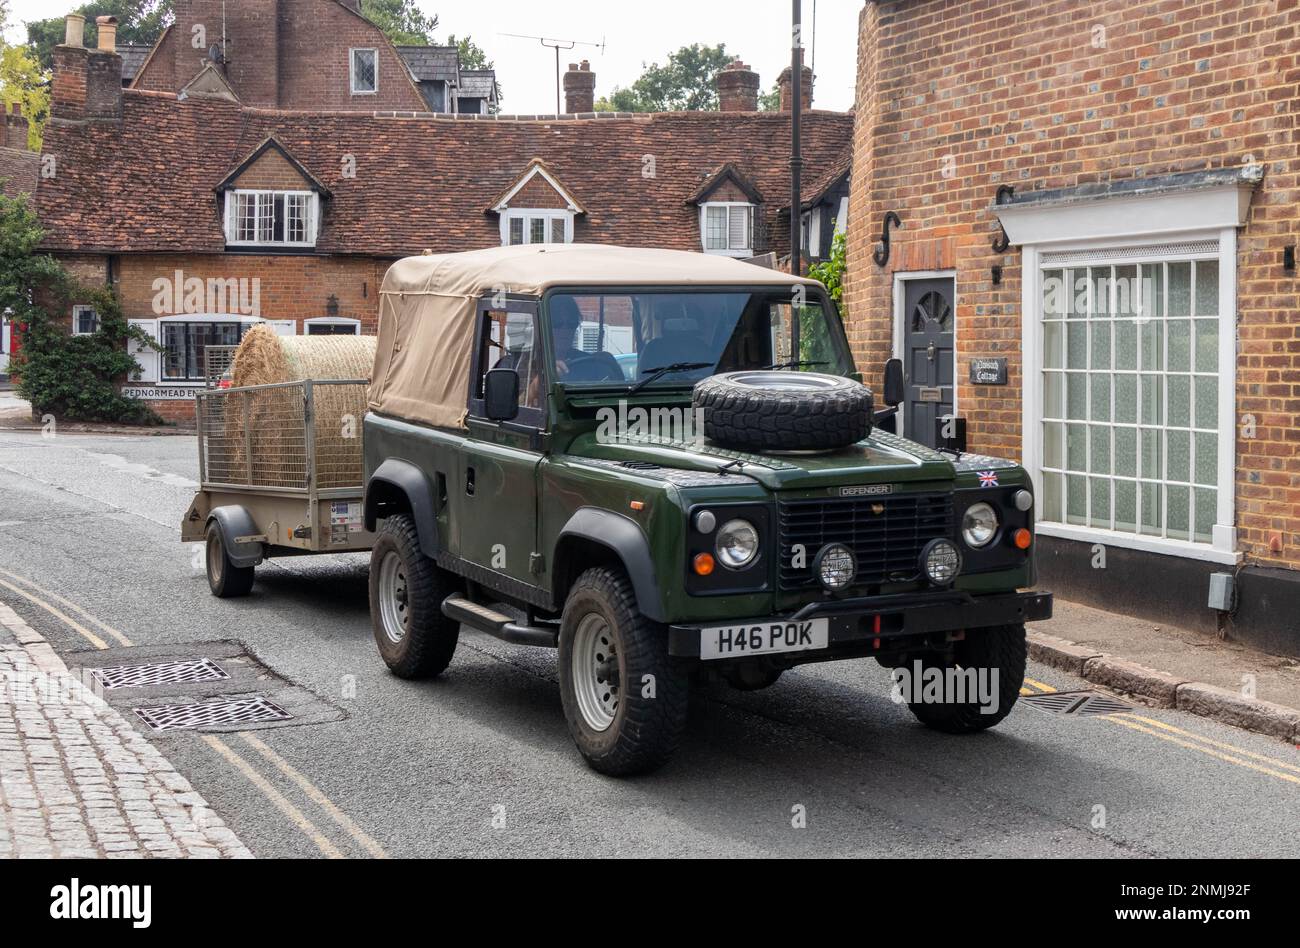 Landrover Defender pulling truck with a bale of hay, Chesham, Buckinghamshire, England Stock Photo